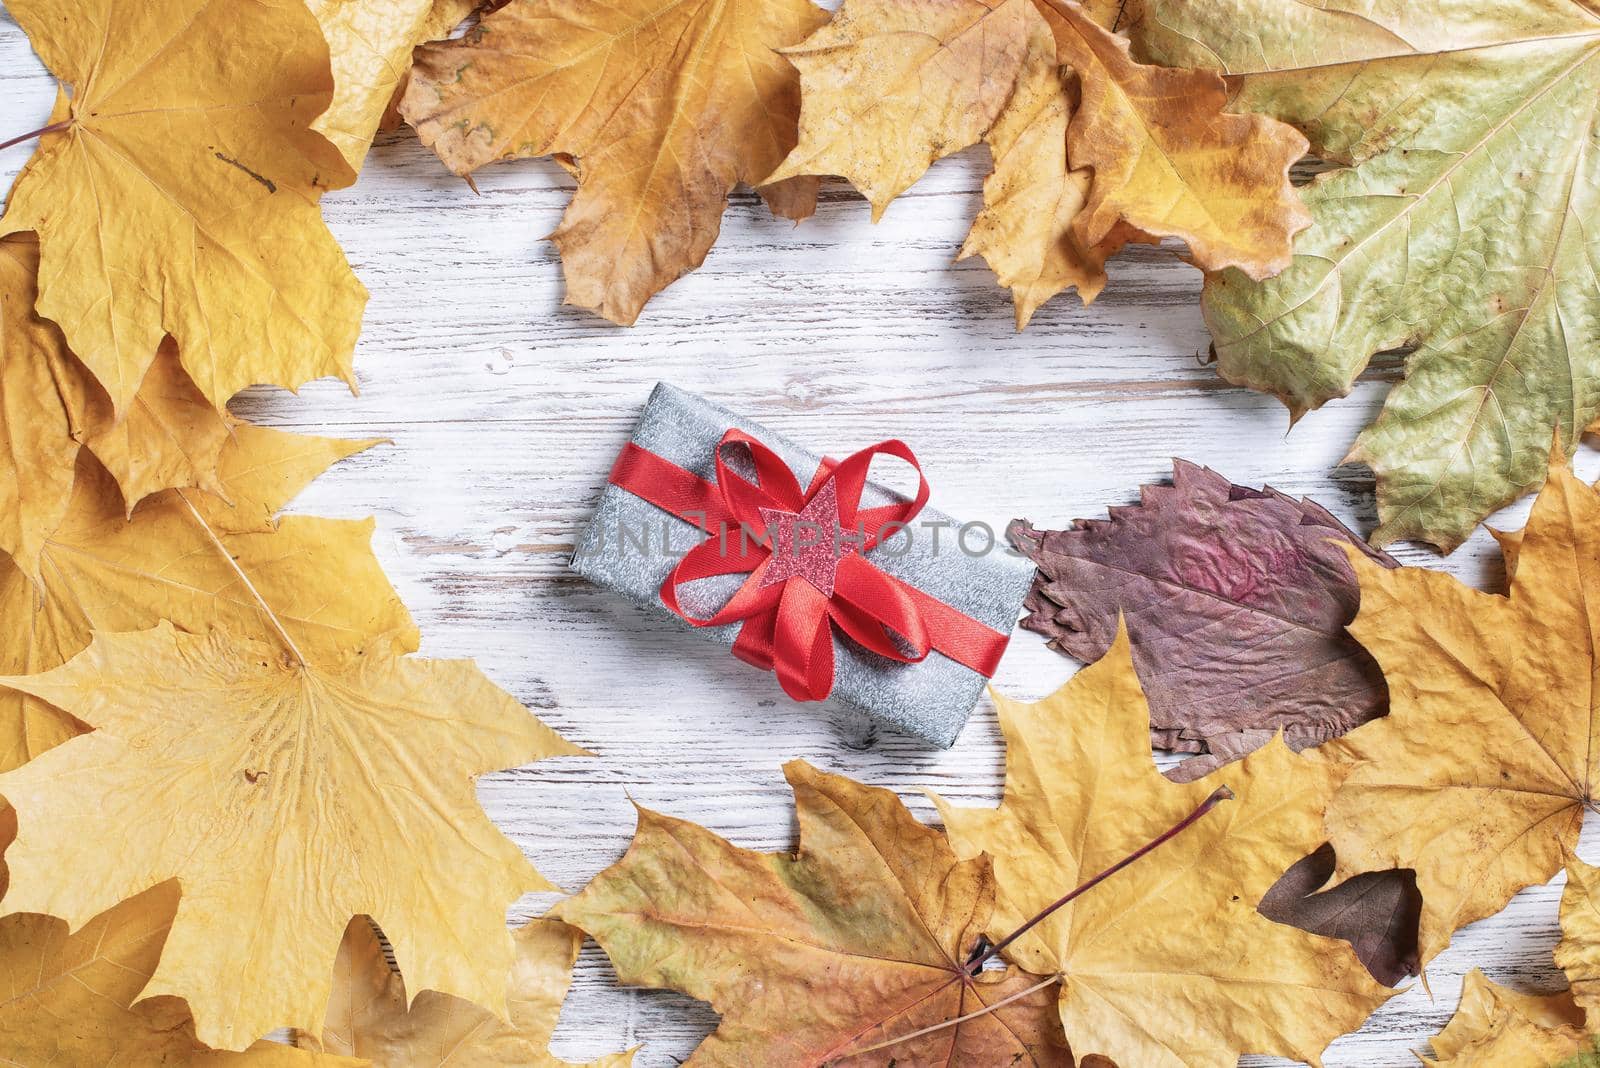 Flat lay cute composition with gift box and yellow autumn leaves. Holiday present decorated red ribbon bow on vintage wooden desk. Happy thanksgiving congratulation. Still life of autumn season.